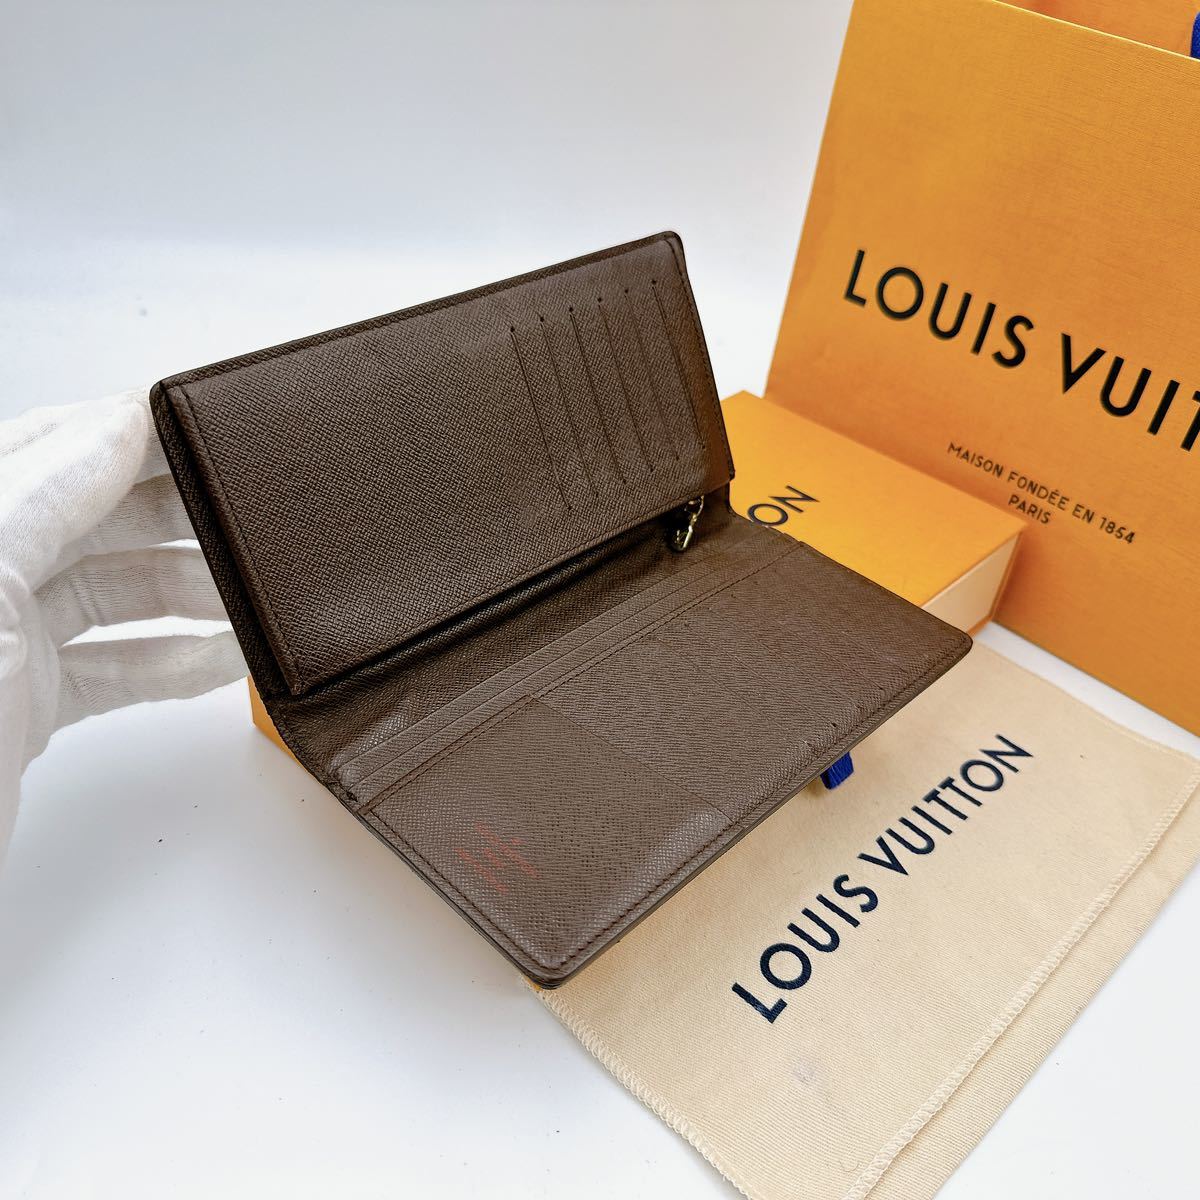 A2167【美品】LOUIS VUITTON ルイヴィトン ダミエ ポルトフォイユ